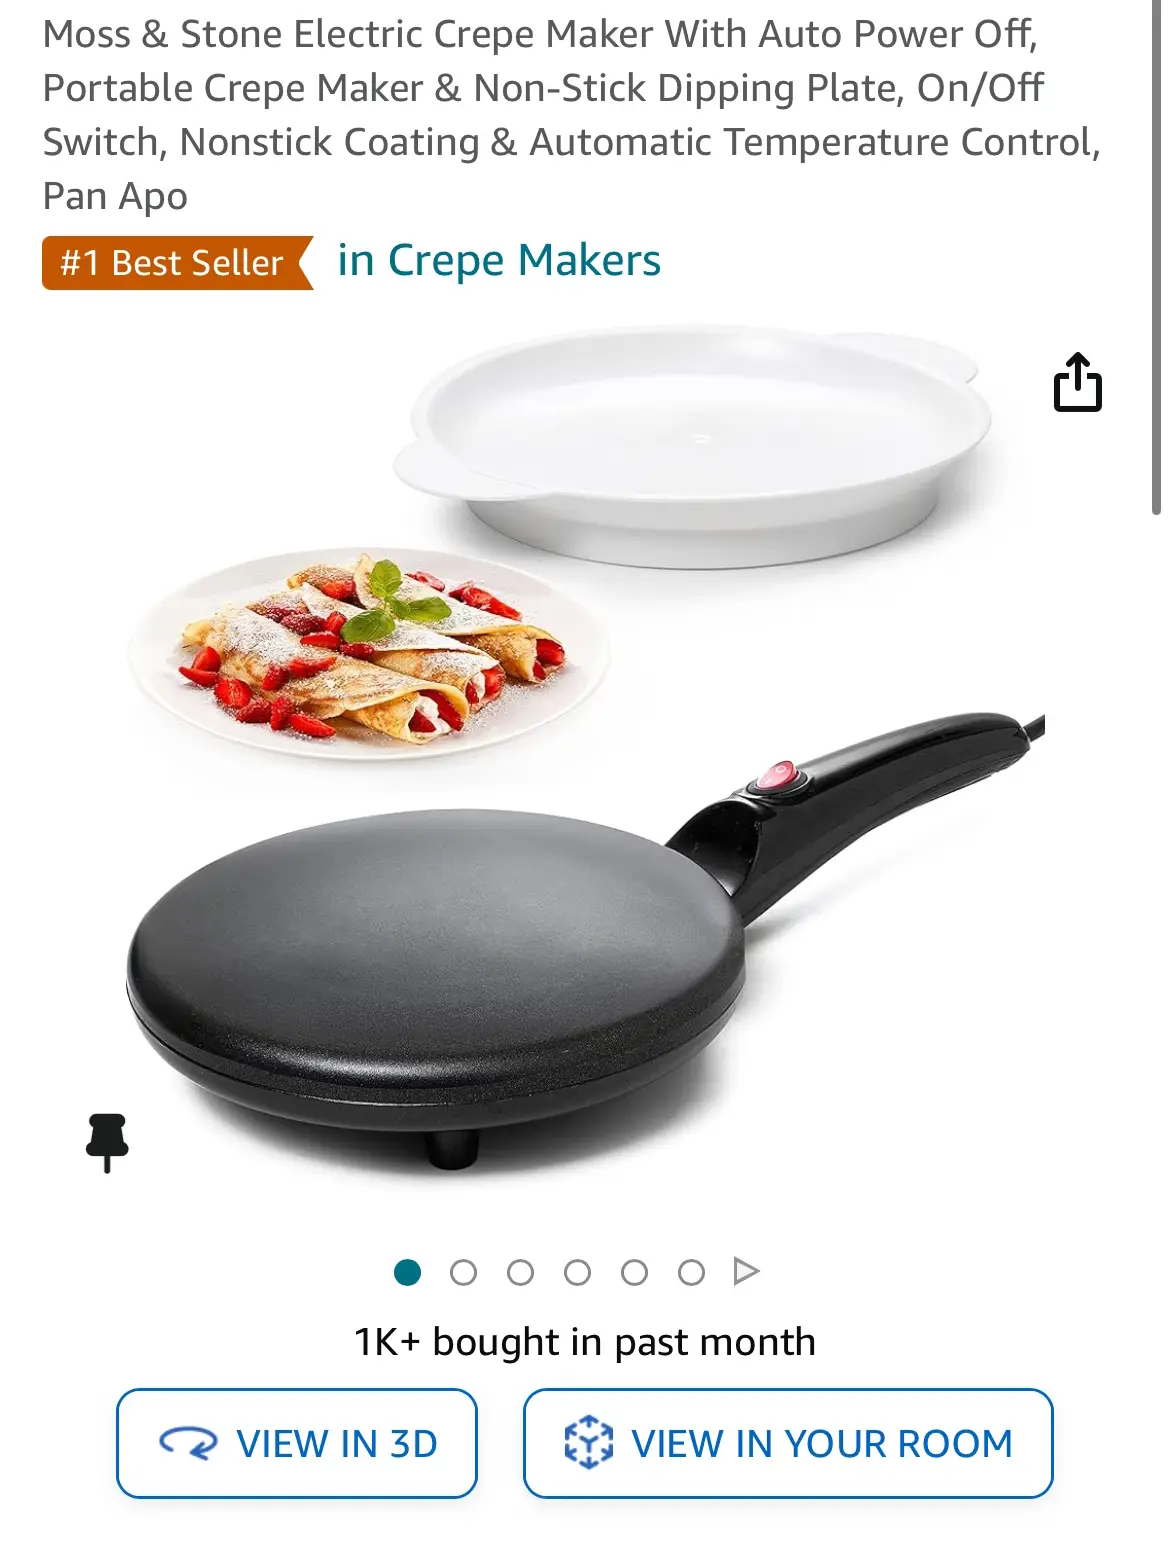  Moss & Stone Electric Crepe Maker With Auto Power Off, Portable Crepe  Maker & Non-Stick Dipping Plate, On/Off Switch, Nonstick Coating &  Automatic Temperature Control, Pan Apo: Home & Kitchen